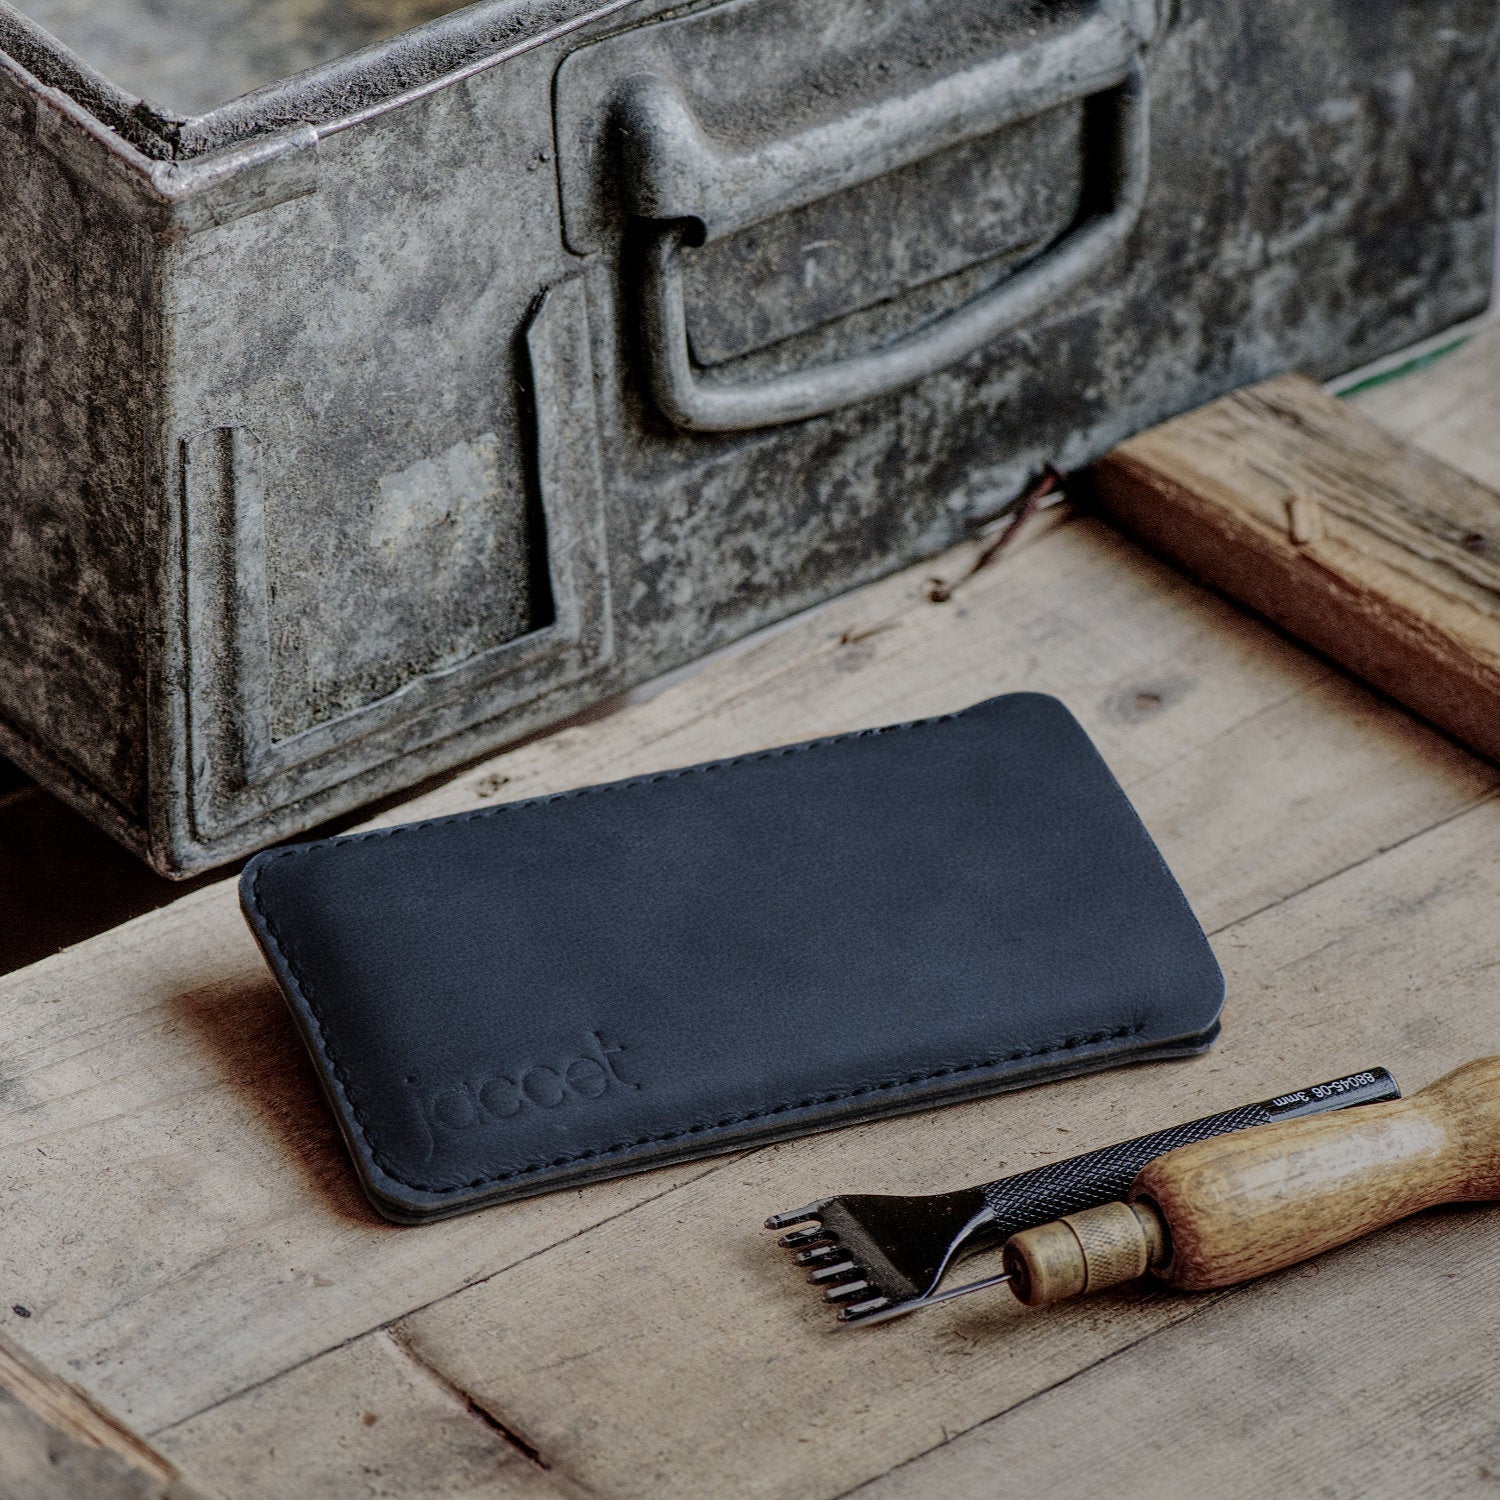 JACCET leather Samsung Galaxy sleeve - anthracite/black leather with black wool felt. 100% Handmade